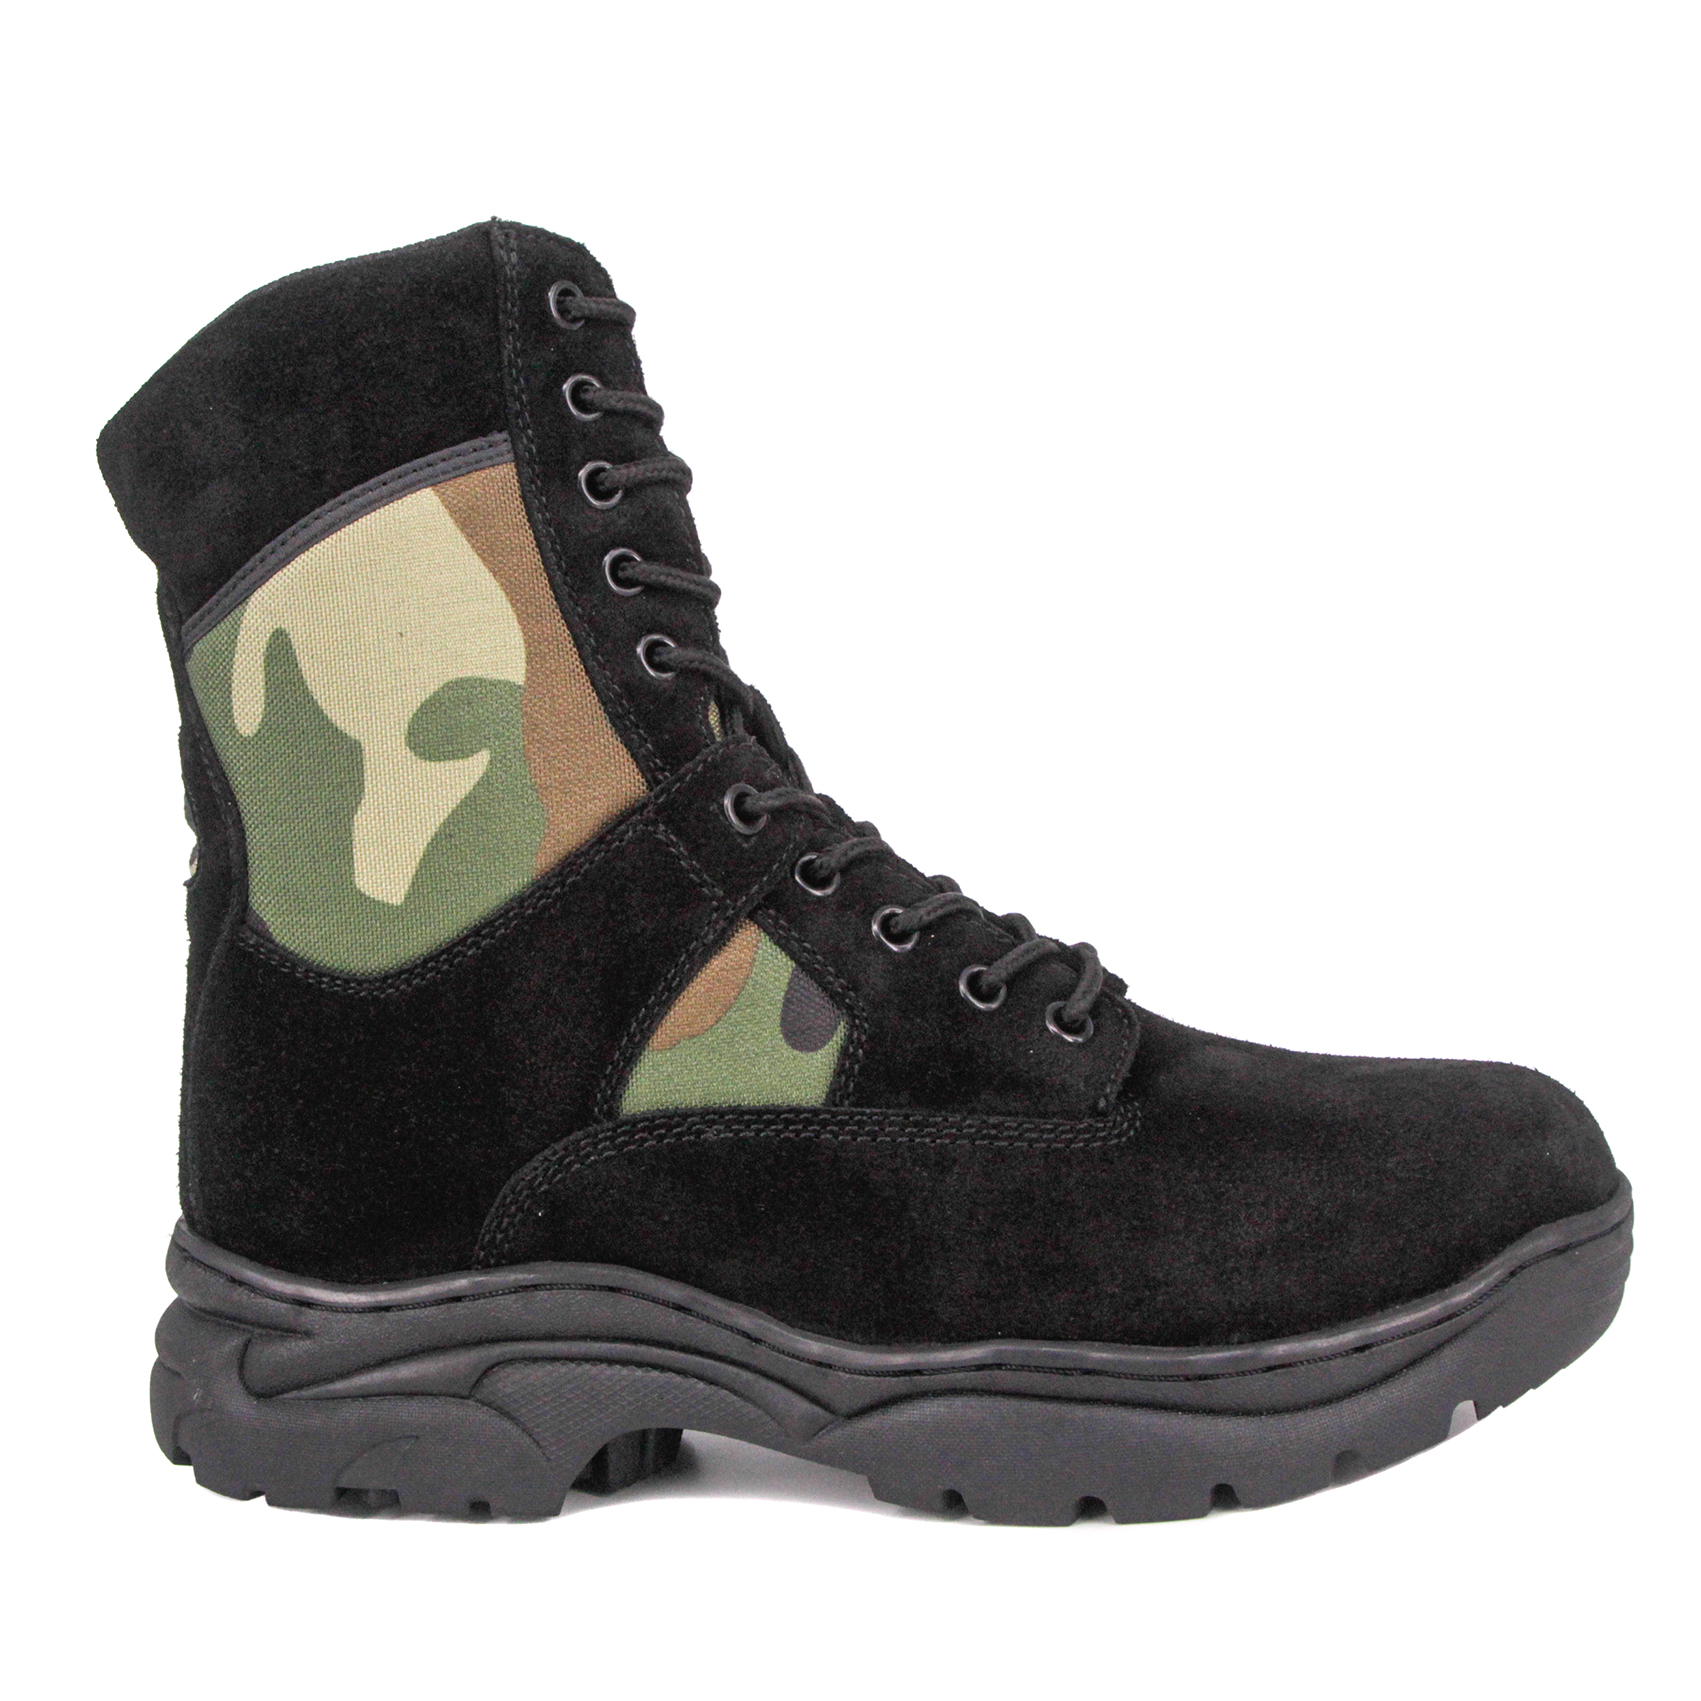 MILFORCE Genuine Leather Tactical Boots army jungle boots